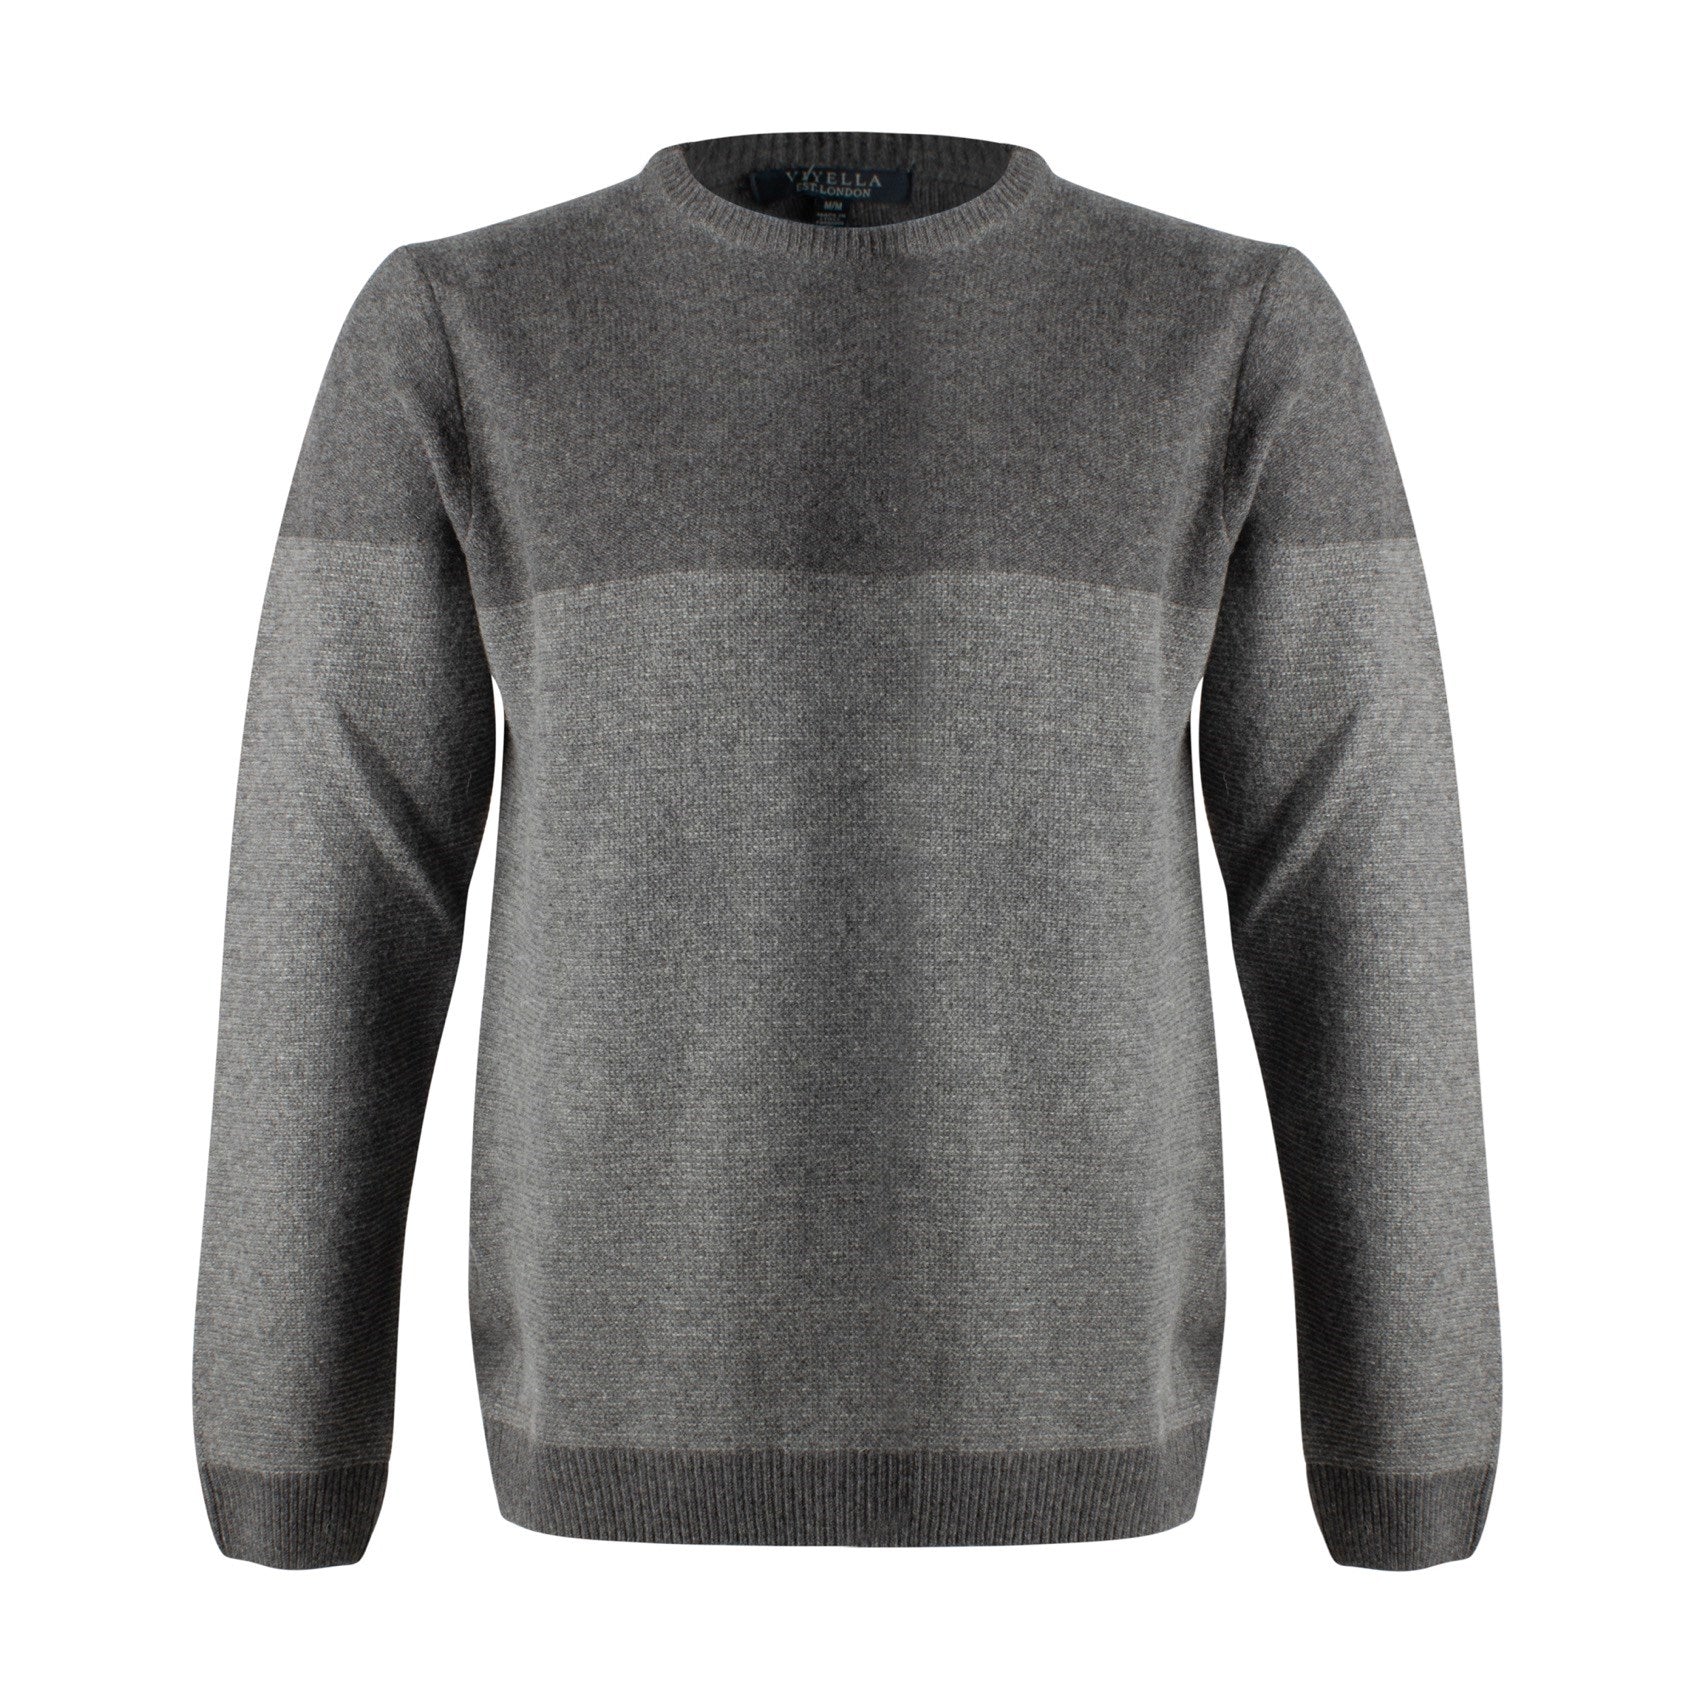 Wool Blend Colorblock Crew Neck Sweater in Grey by Viyella